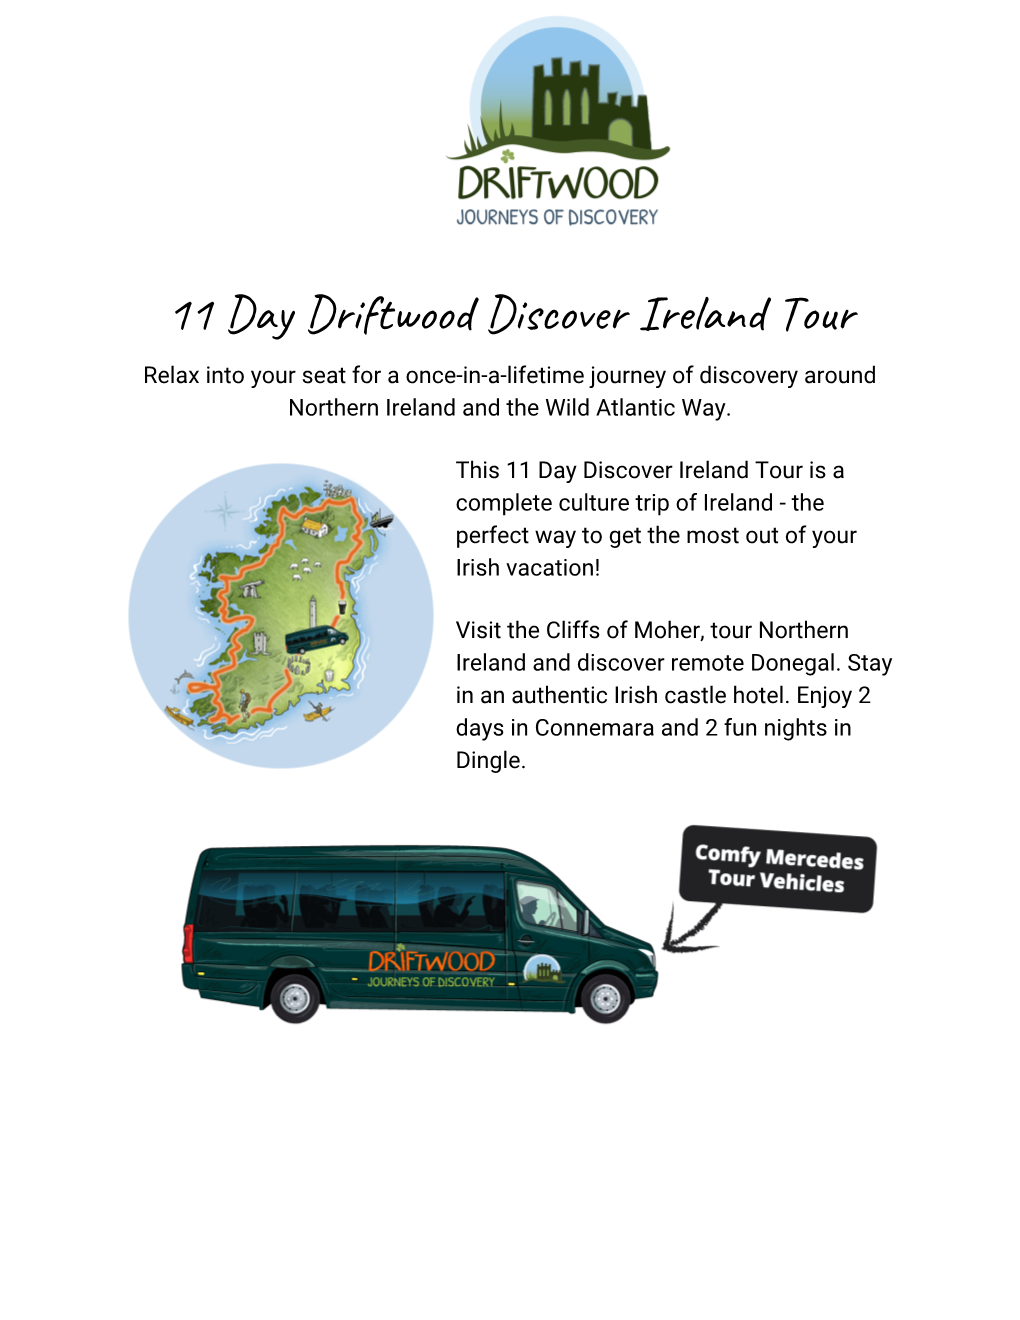 11 Day Driftwood Discover Ireland Tour Relax Into Your Seat for a Once-In-A-Lifetime Journey of Discovery Around Northern Ireland and the Wild Atlantic Way